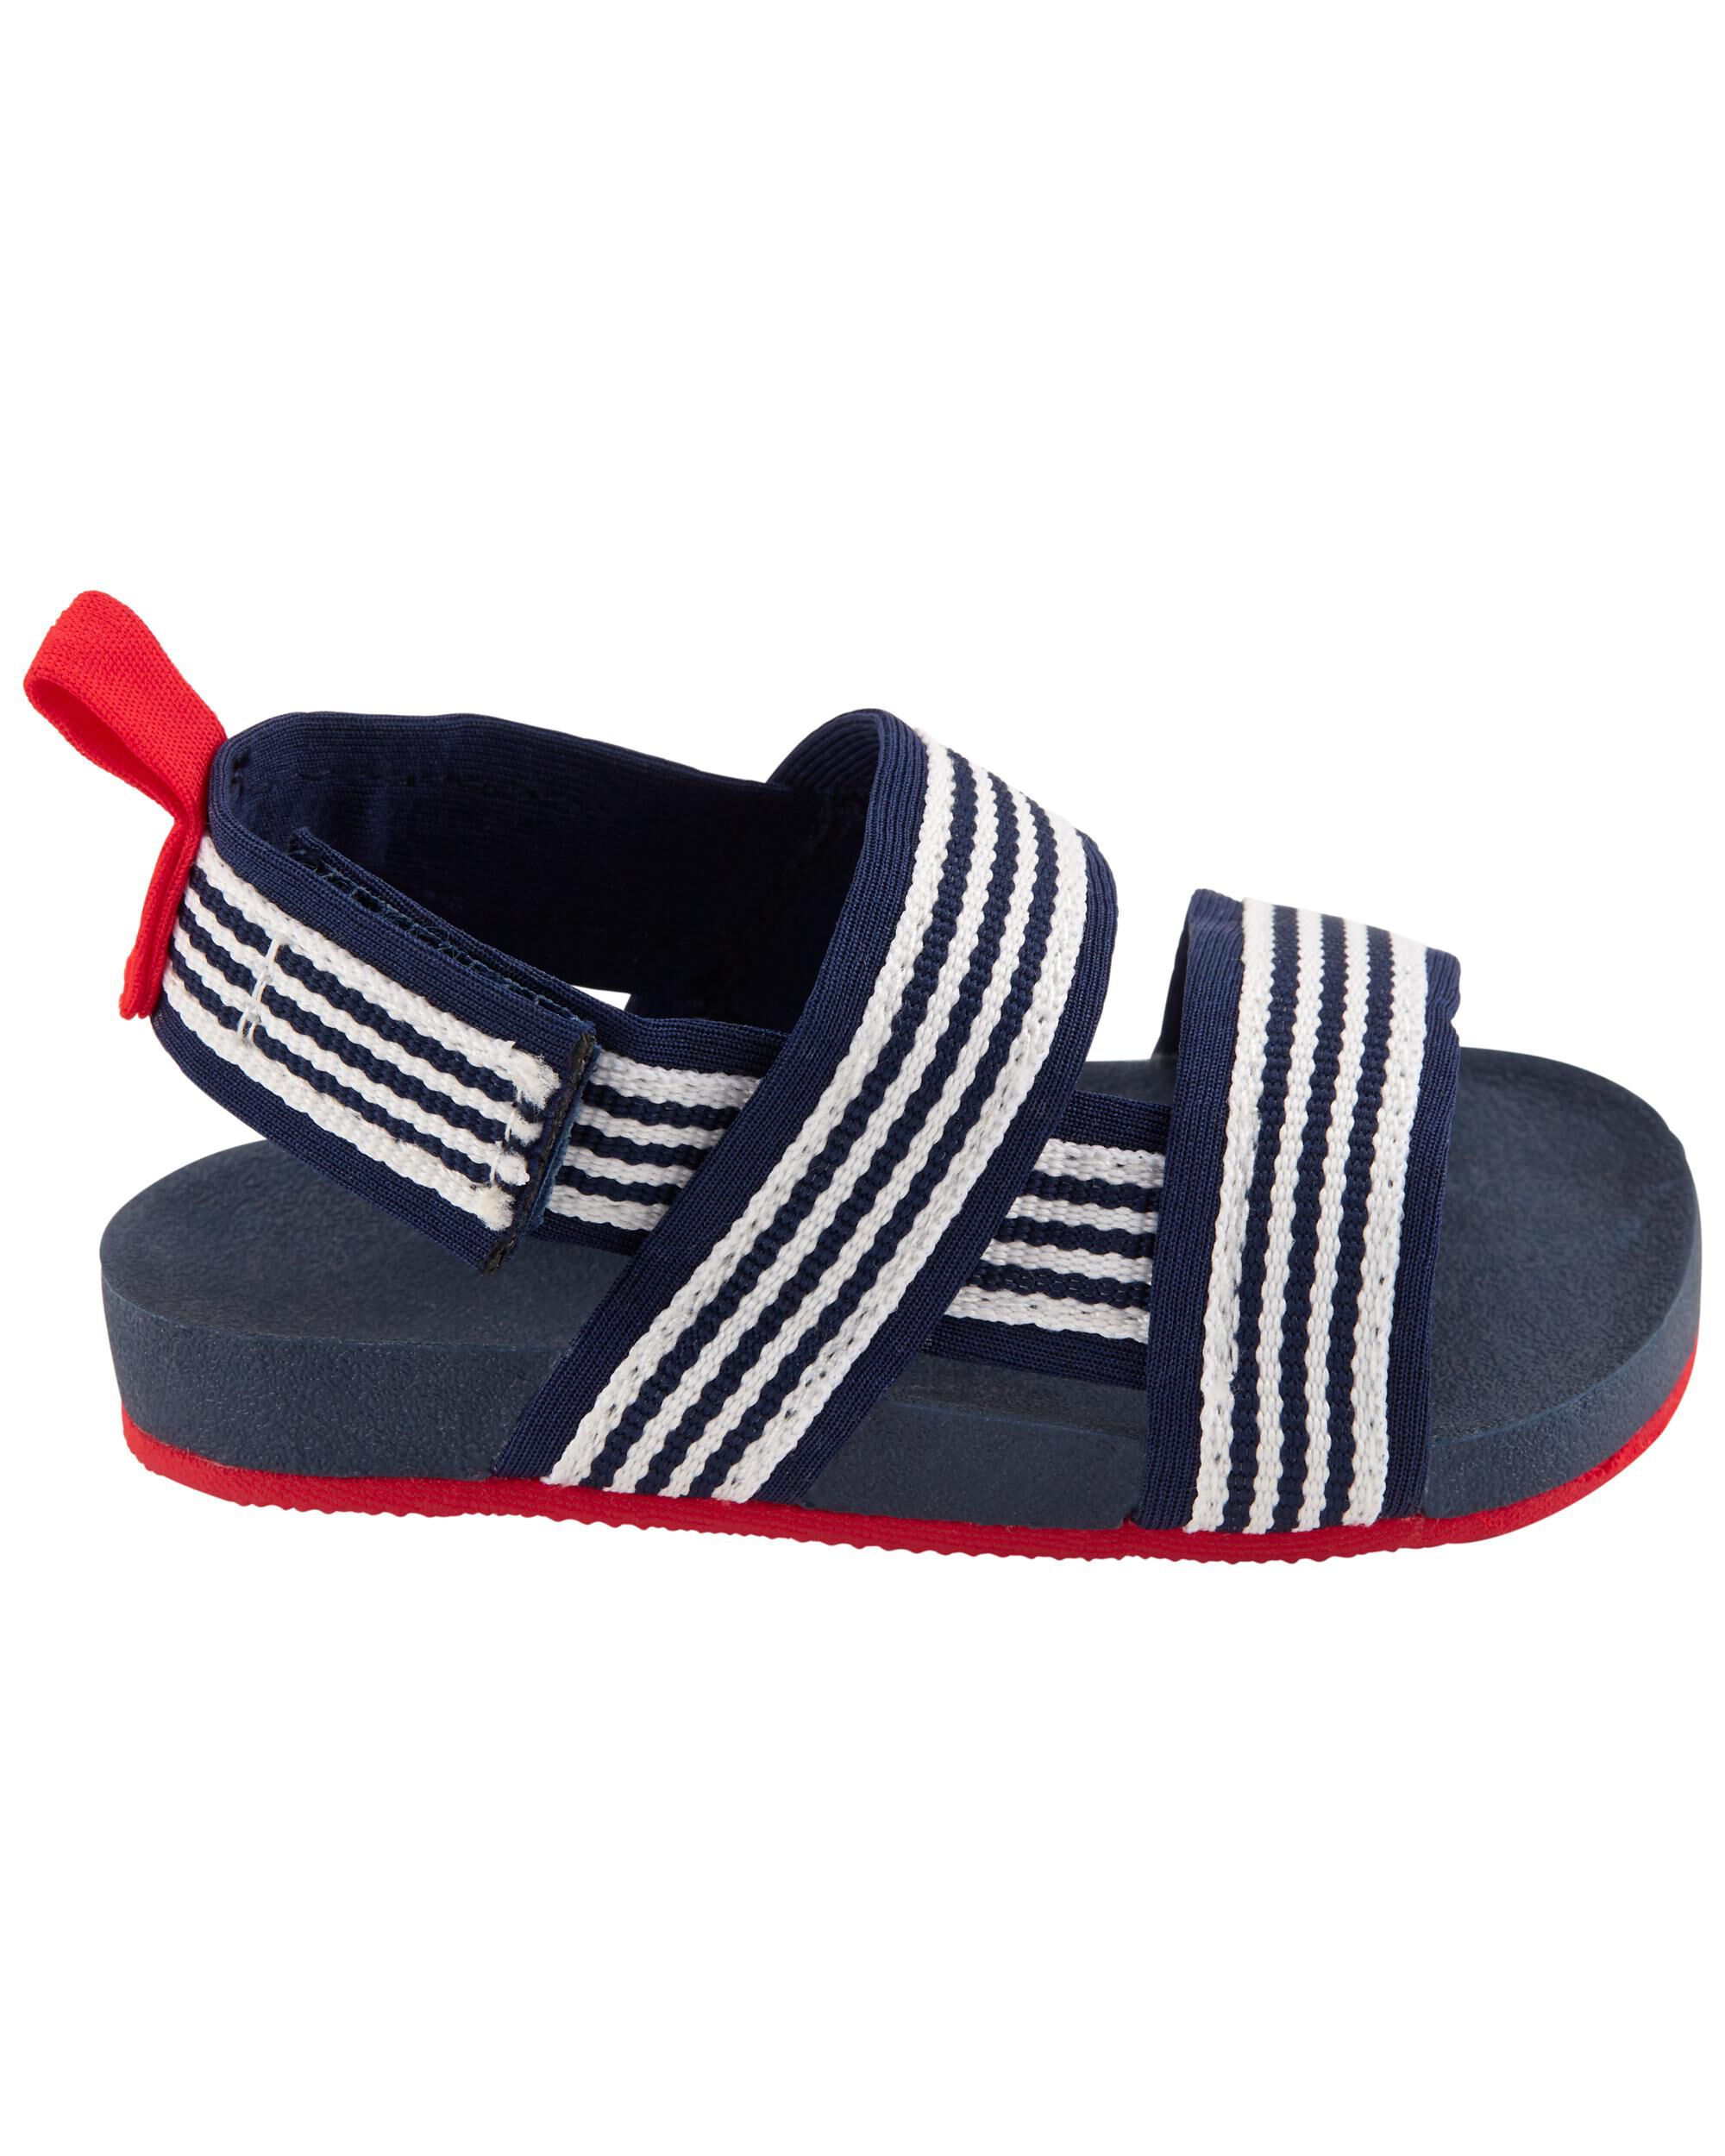 Carter's Cork Sandal Baby Shoes Blue Navy Size 9-12 months size 4 New NWT 